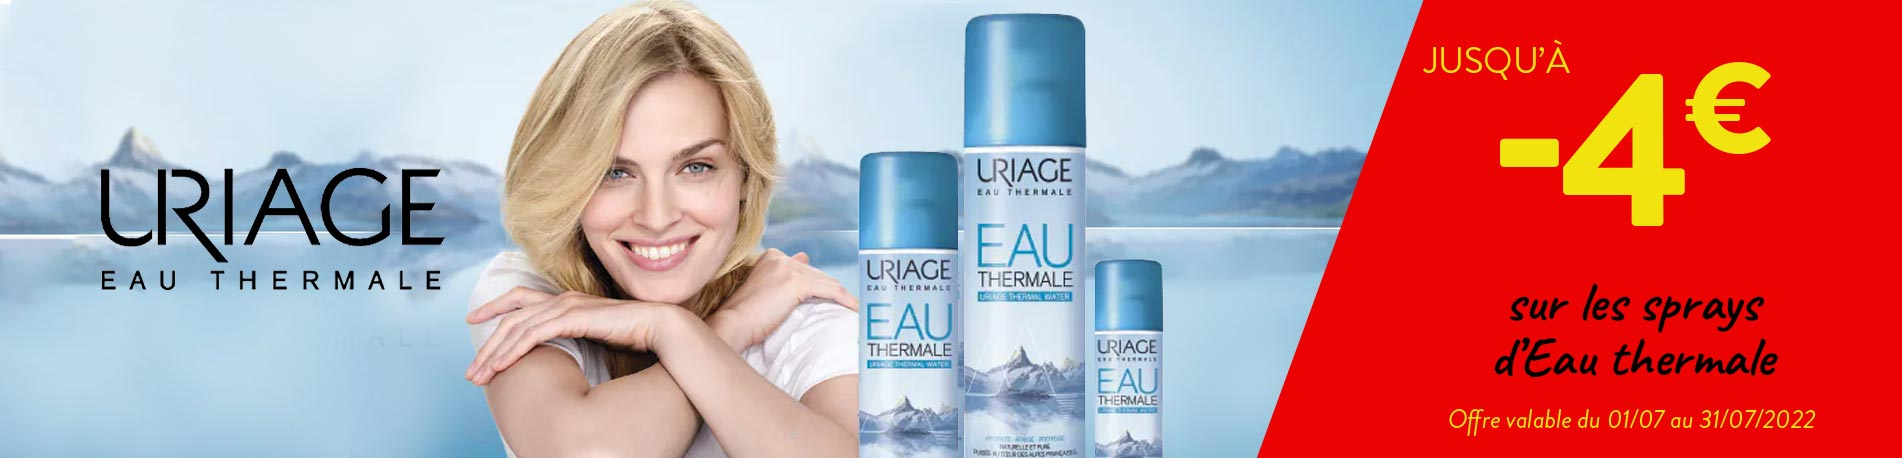 Promotion Uriage Eau thermale